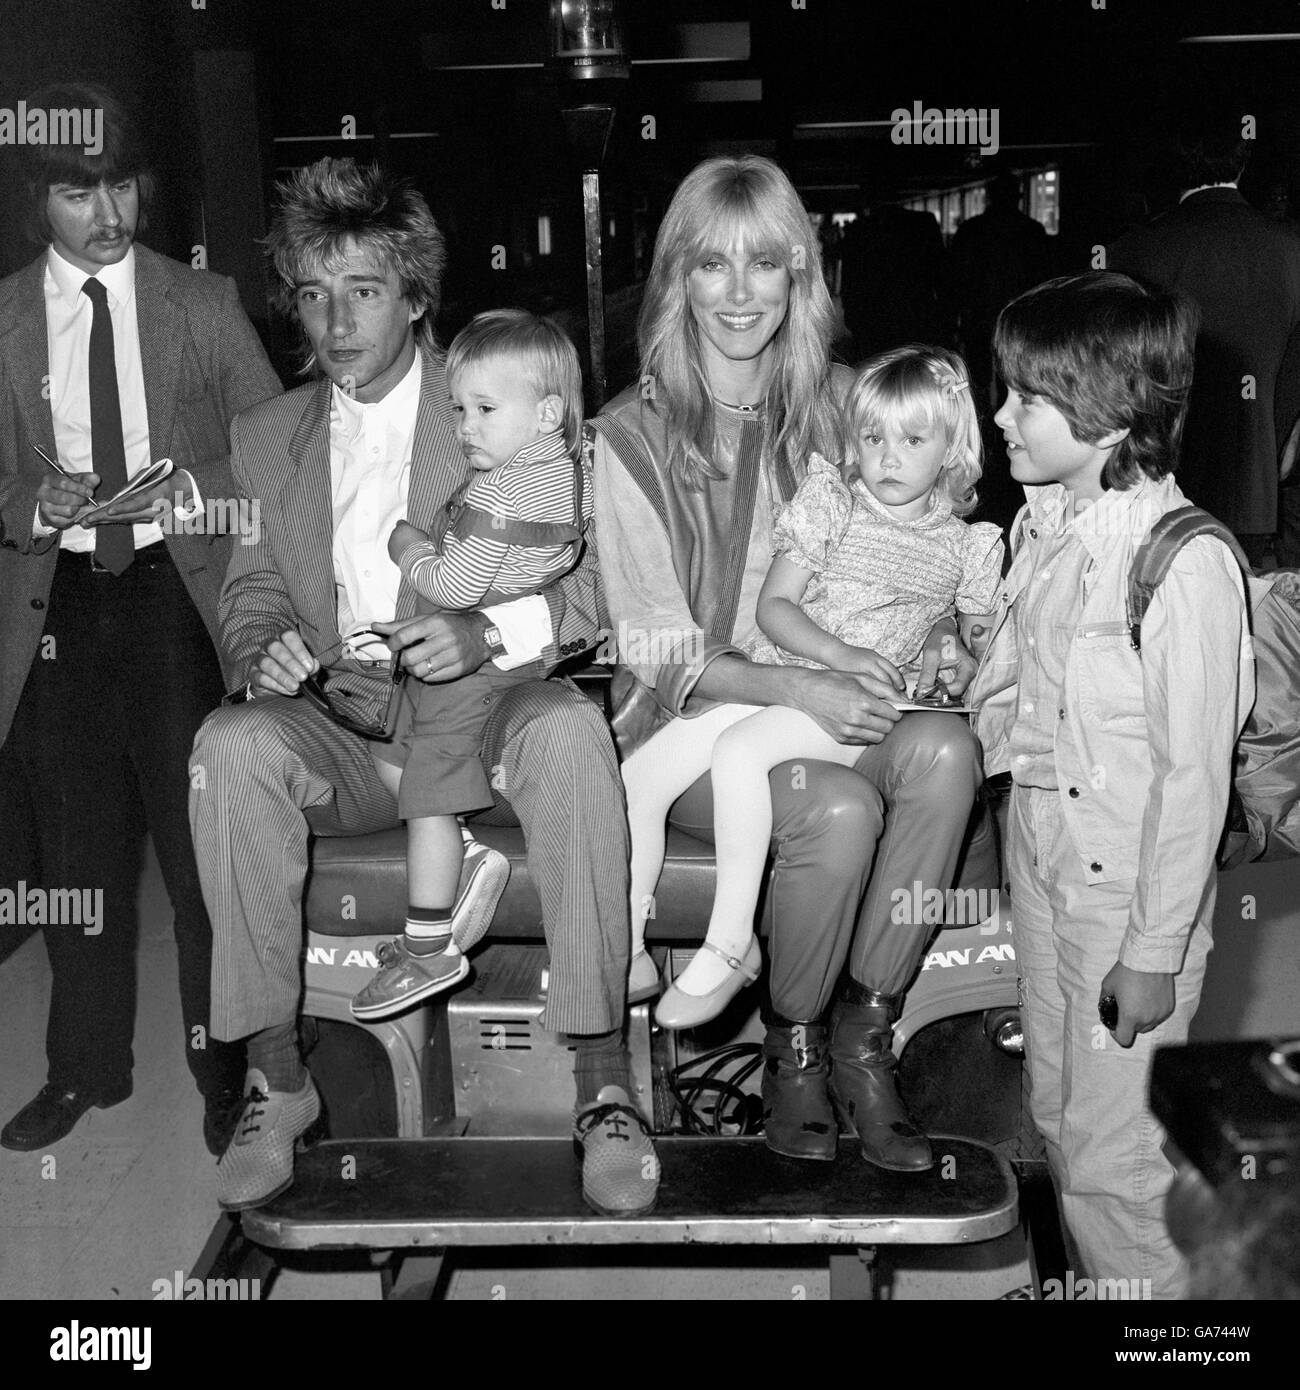 Pop singer Rod Stewart arriving from Los Angeles with his wife Alana and children Sean, 18 months (left), Kimberly, three and Ashley, six (Alana's son by her first marriage). Stock Photo